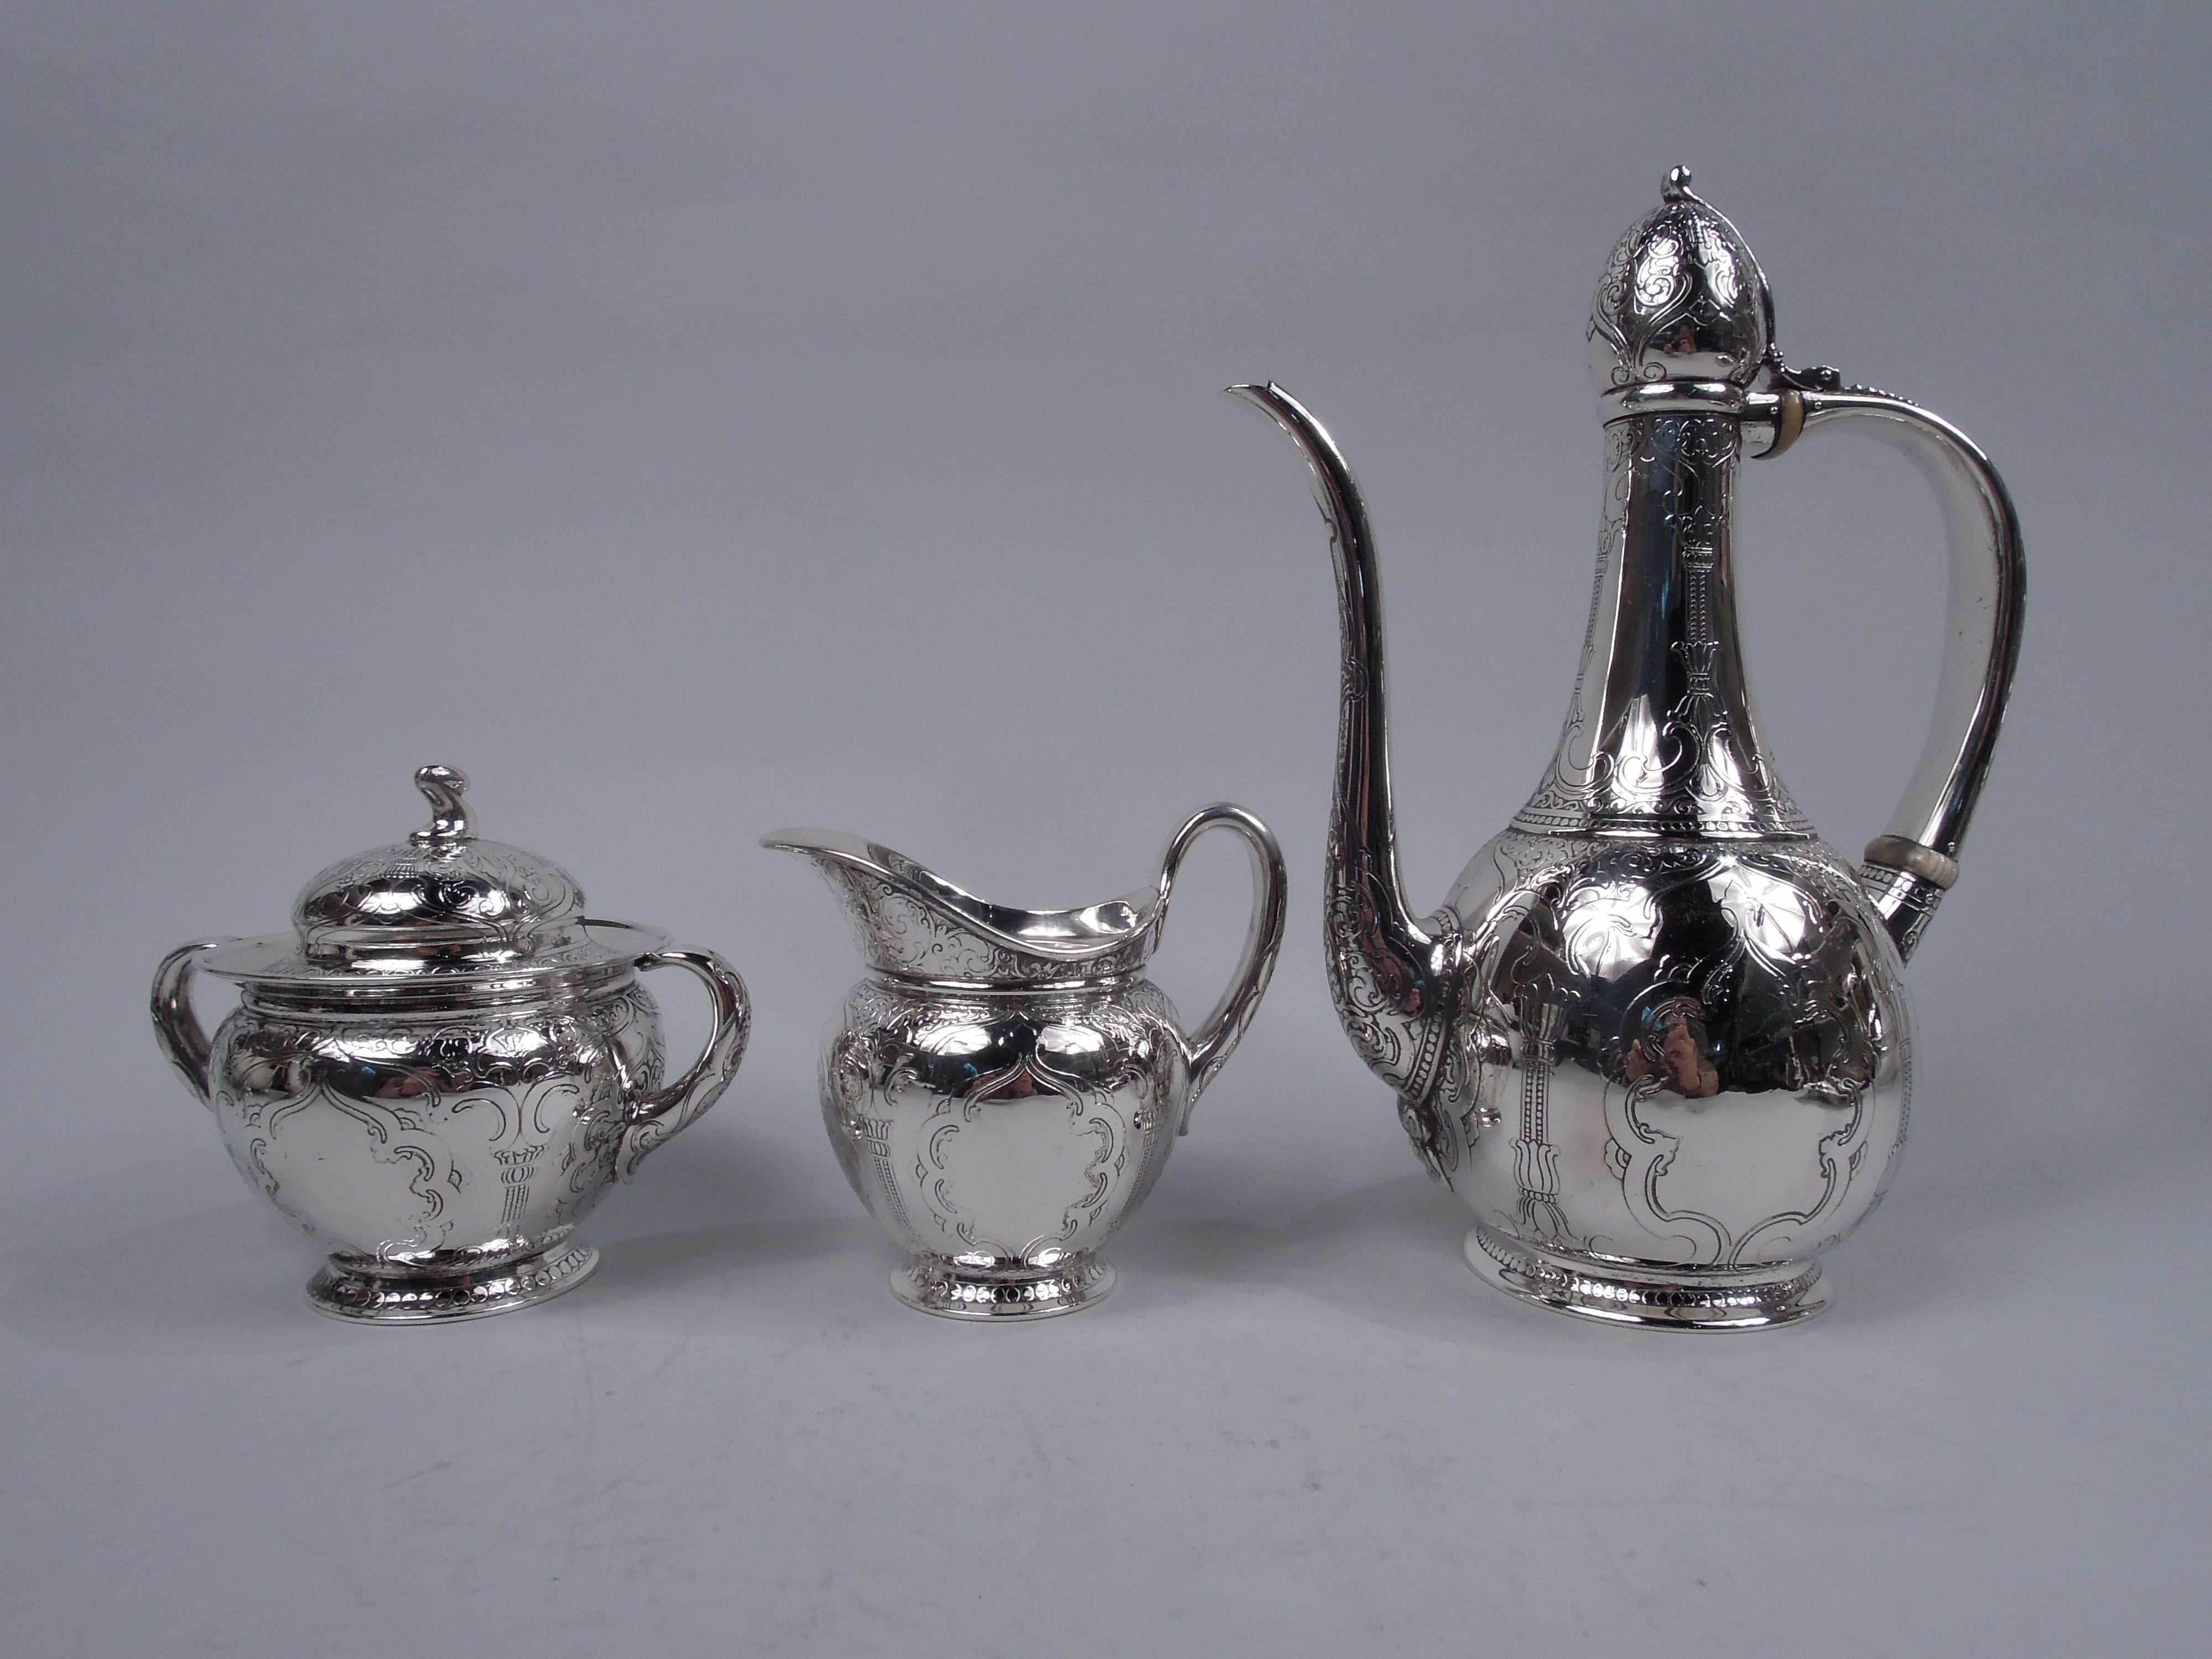 Exotic sterling silver 3-piece Turkish coffee set. Made by Tiffany & Co. in New York, ca 1910. This set comprises coffeepot, creamer, and sugar. Coffeepot: Upward tapering neck and round bowl. Ovoid ball cover hinged-mounted to c-scroll handle